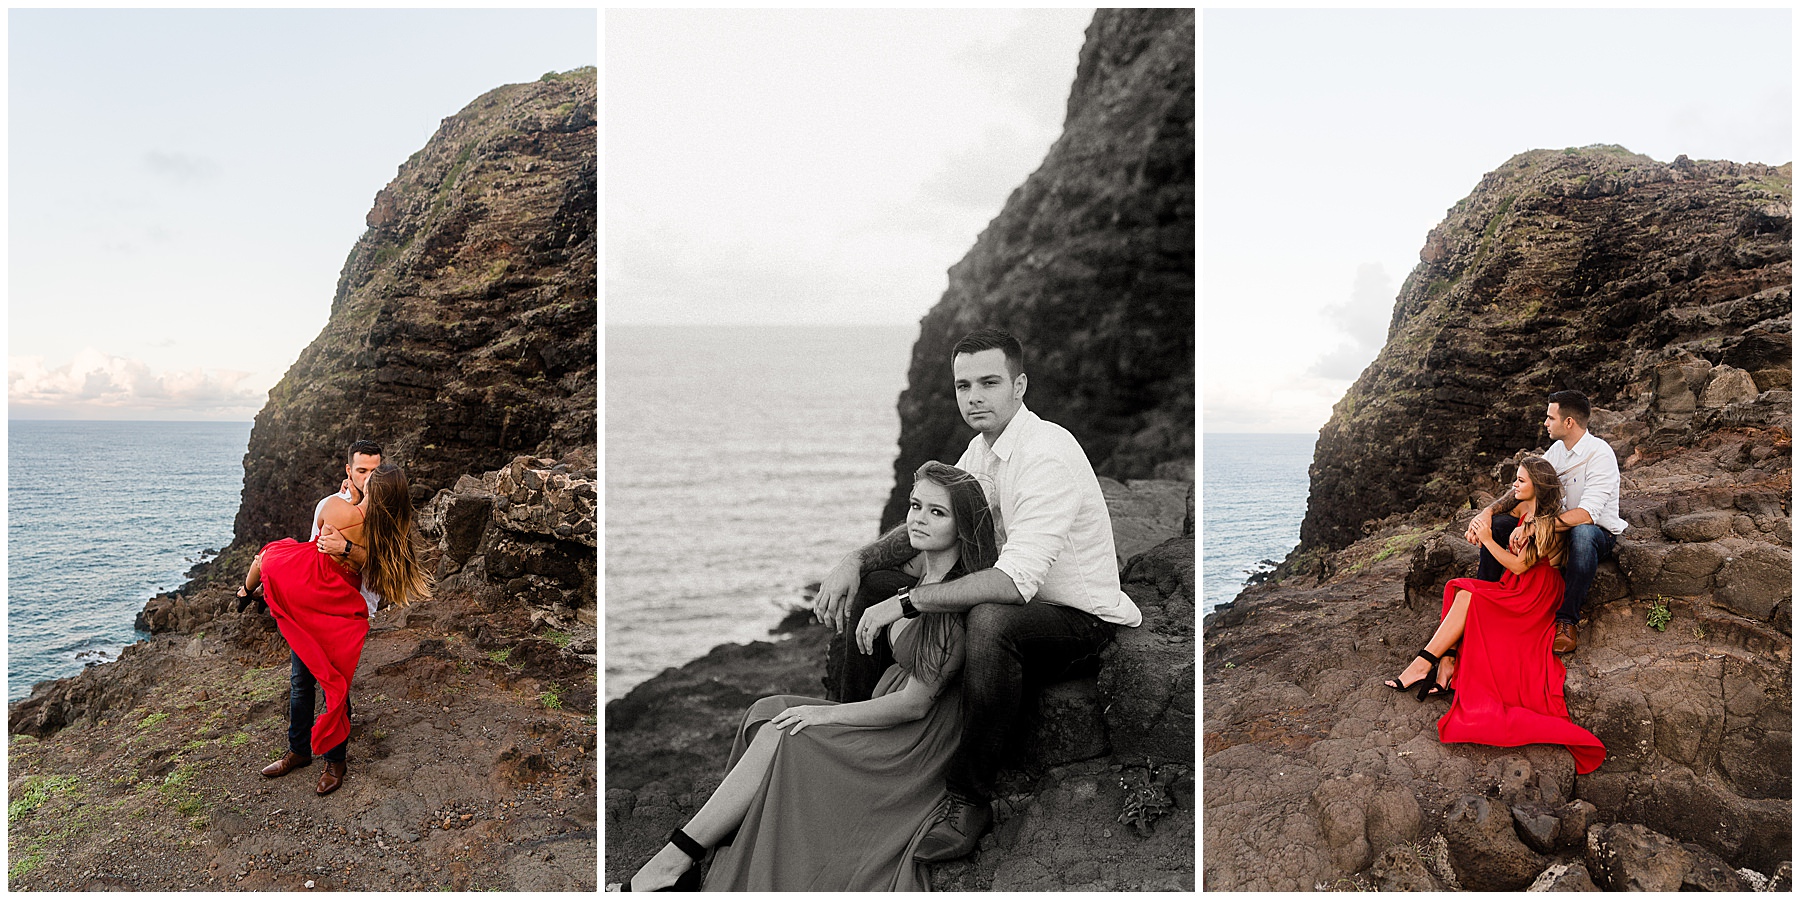 Couple taking anniversary photos at Makapuu lookout on Oahu